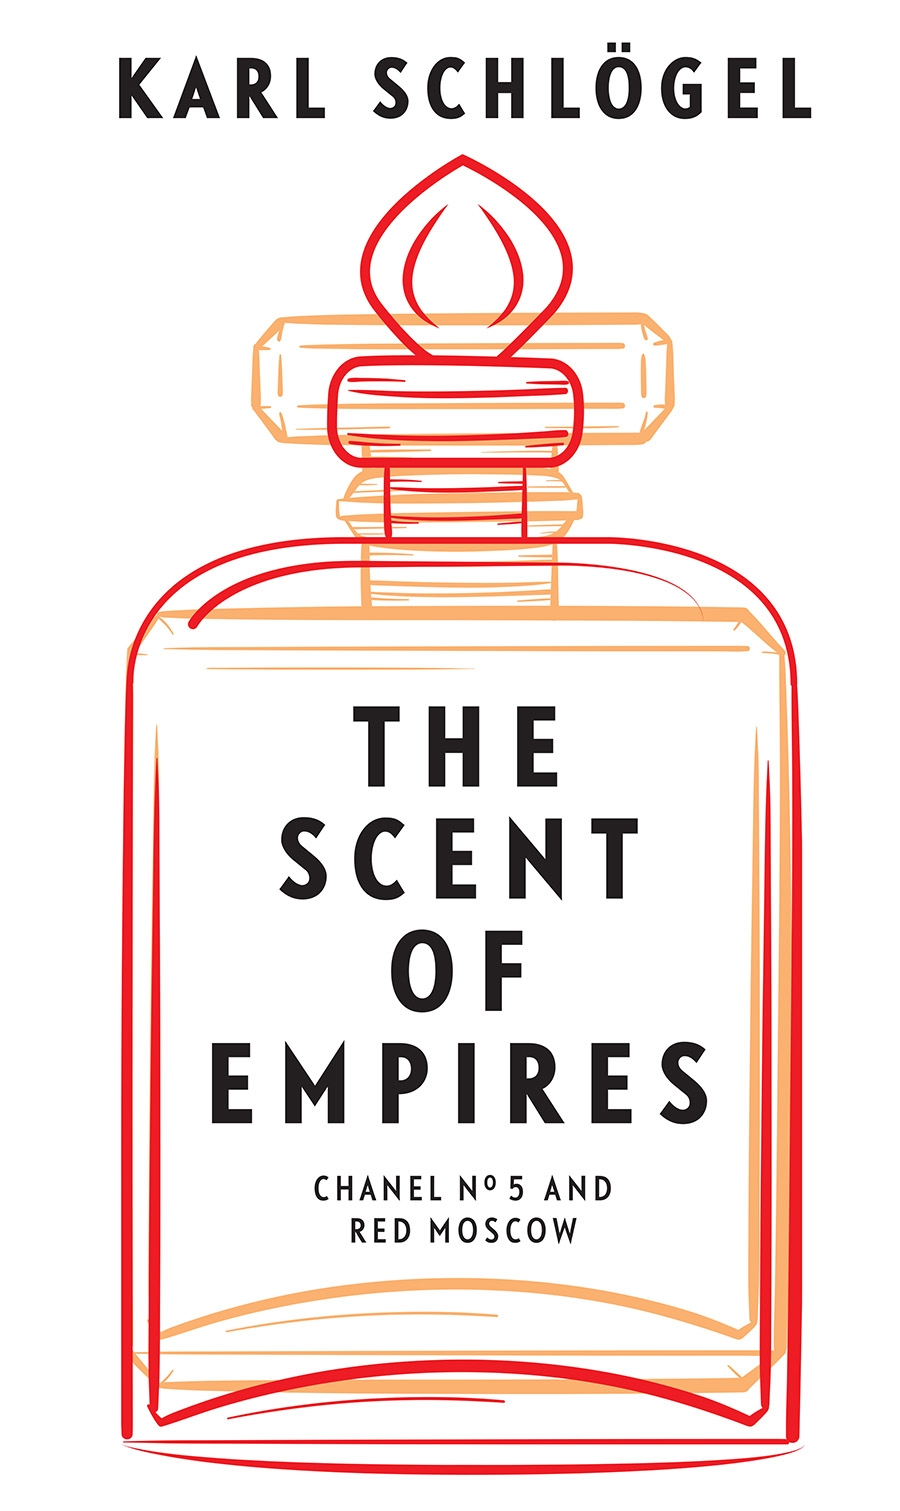 The Scent of Empires: Chanel No. 5 and Red Moscow by Karl Schlögel